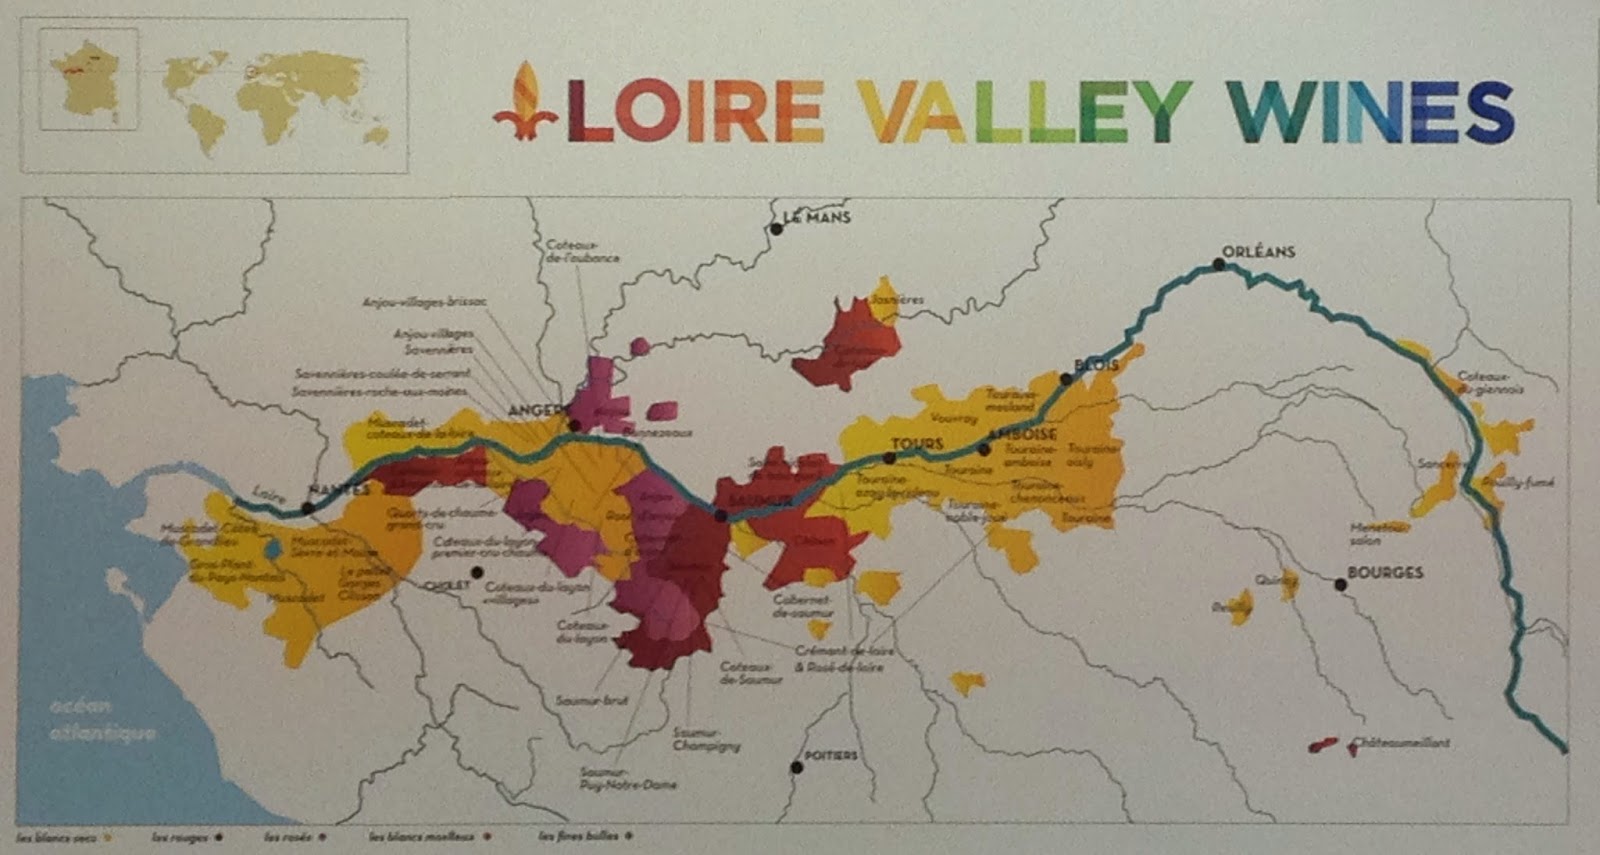 Jim's Loire: The perplexing mystery of the Loire's disappearing